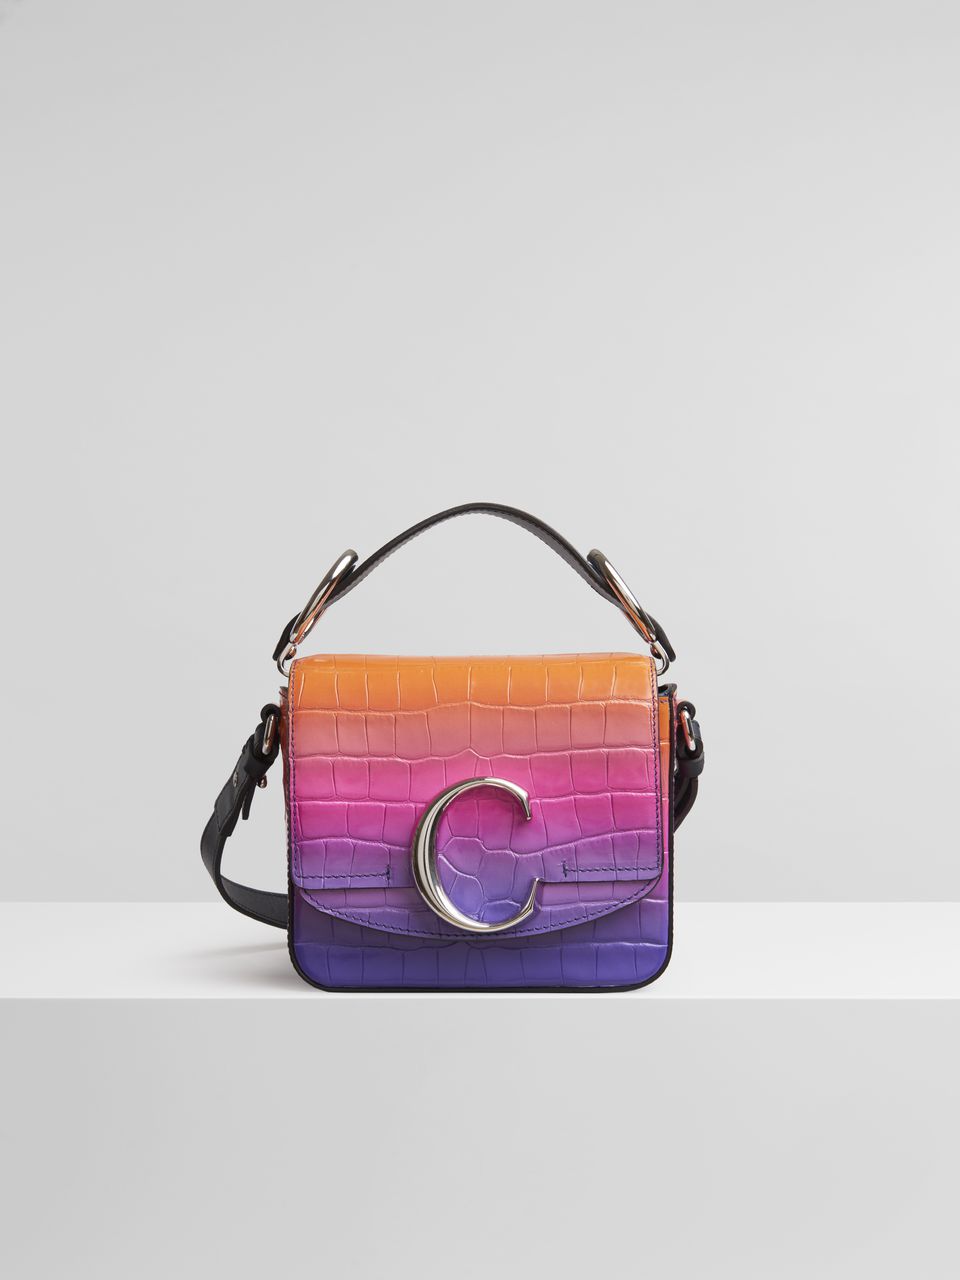 Chloe Spring/Summer 2019 Bag Collection Features The C Bag 